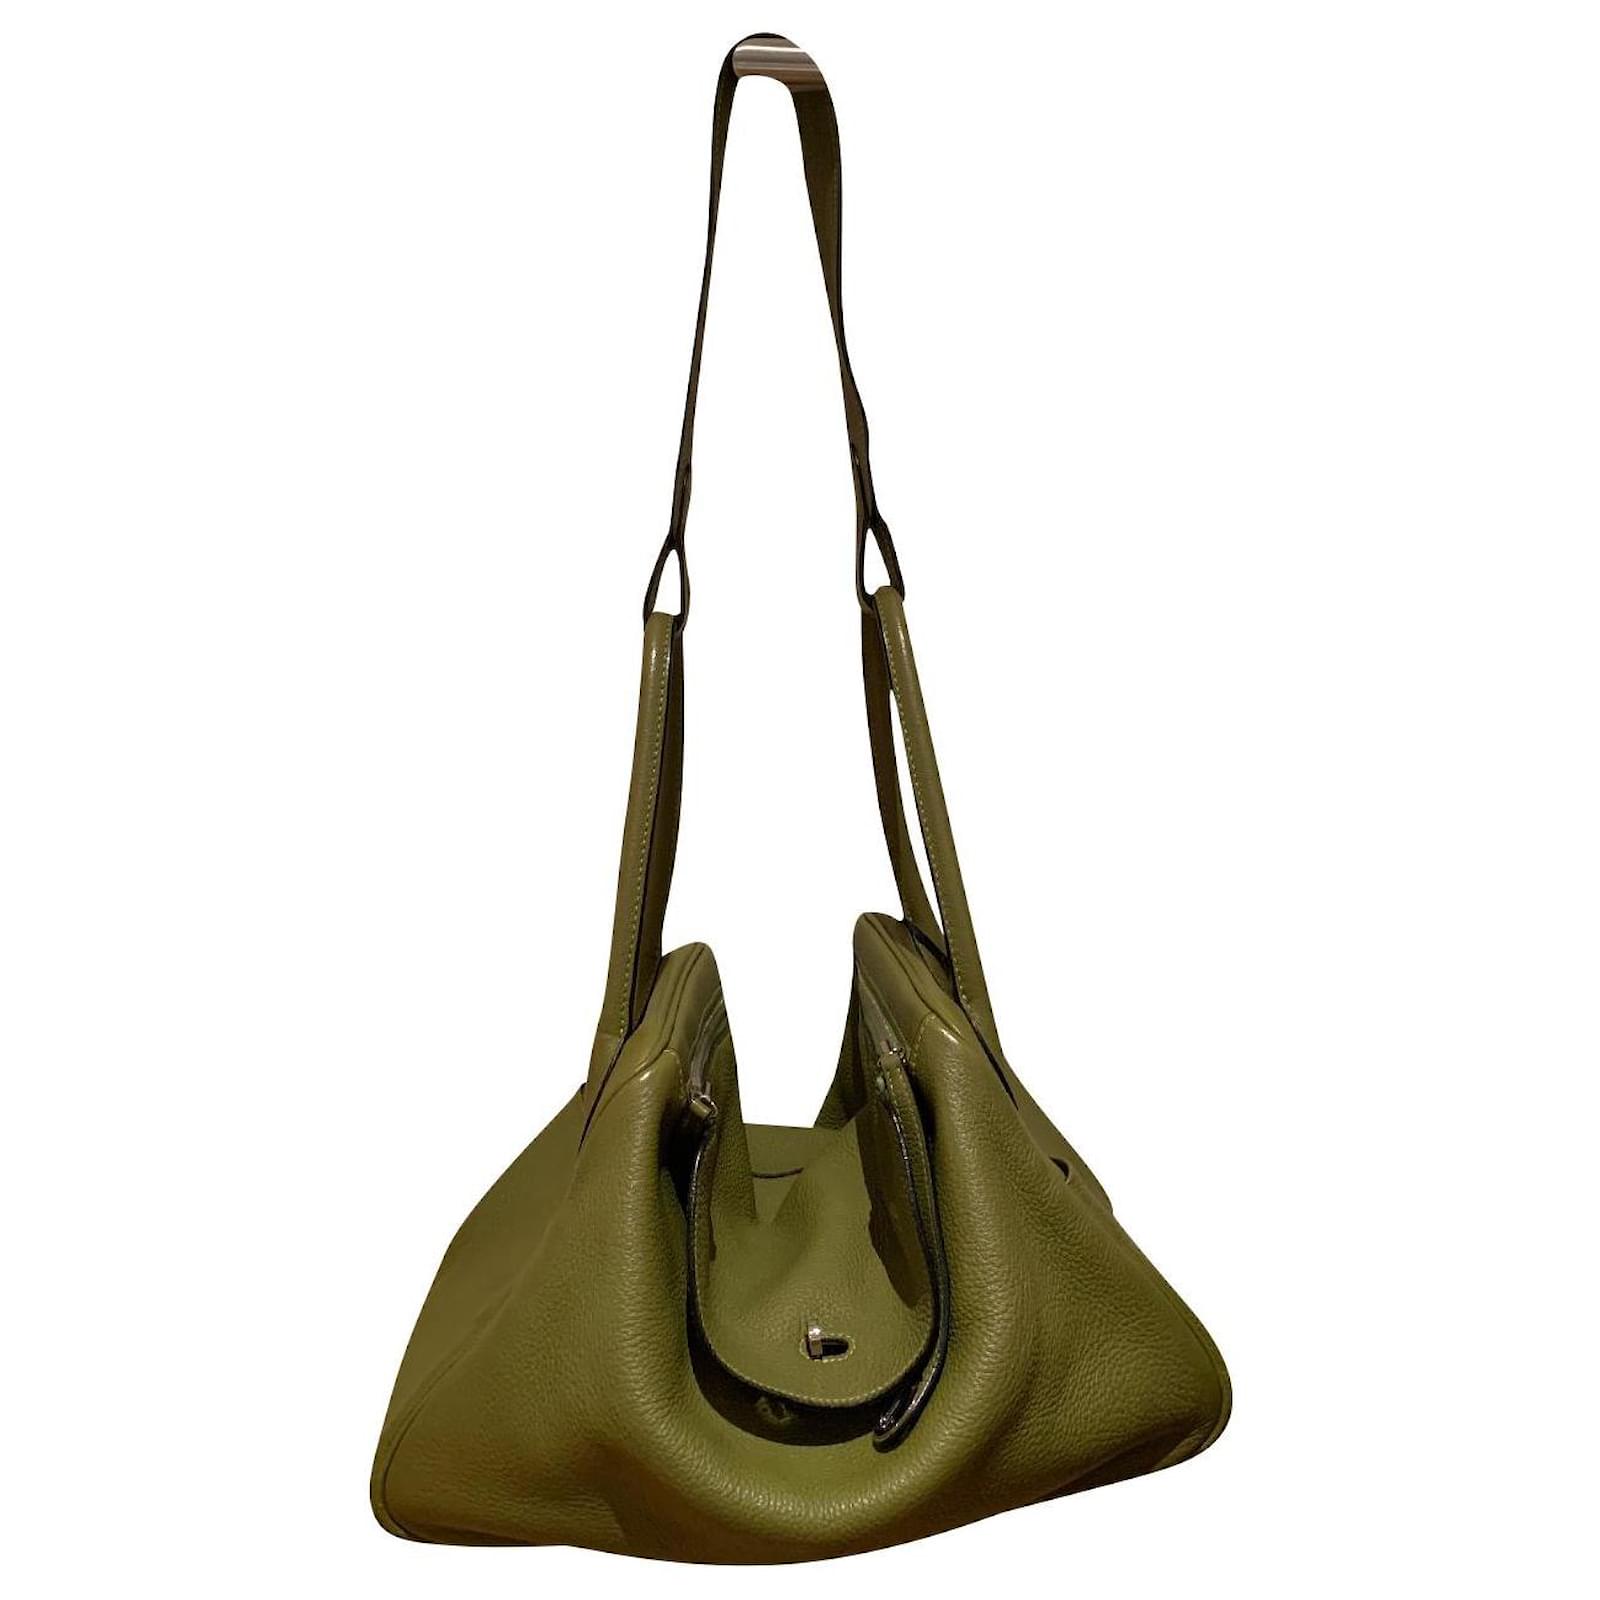 HERMÈS - Lindy bag in olive green leather - Double zip…